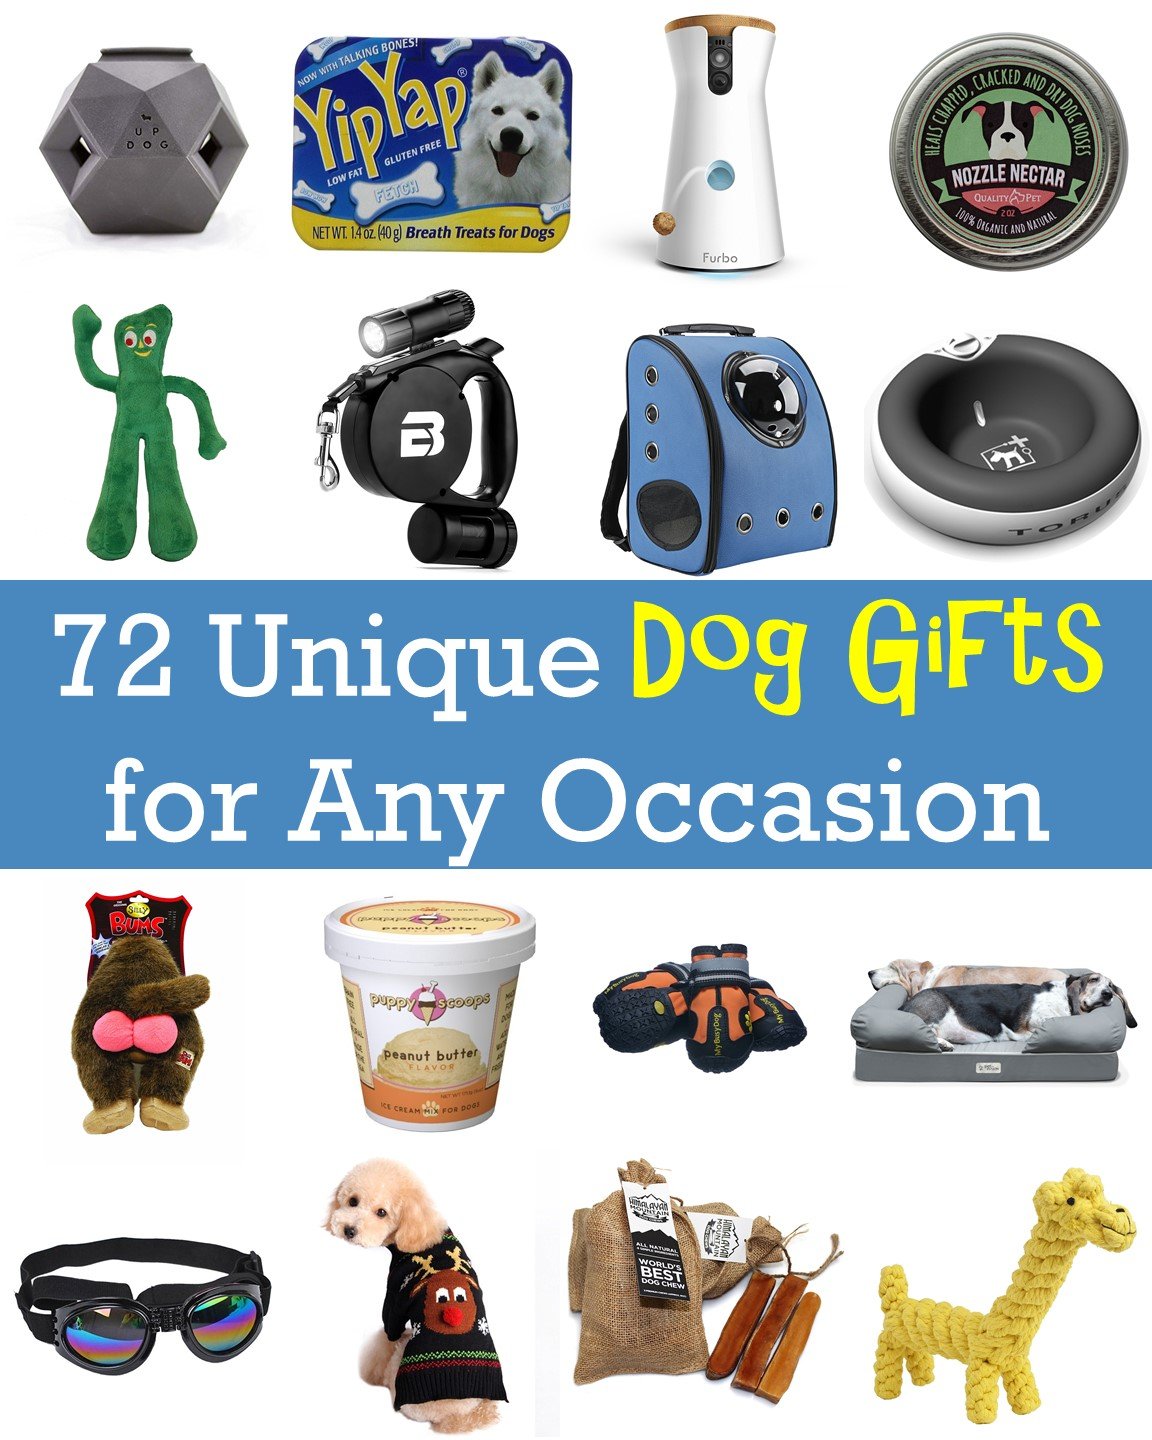 72 Unique Dog Gifts for Any Occasion - Bone & Yarn